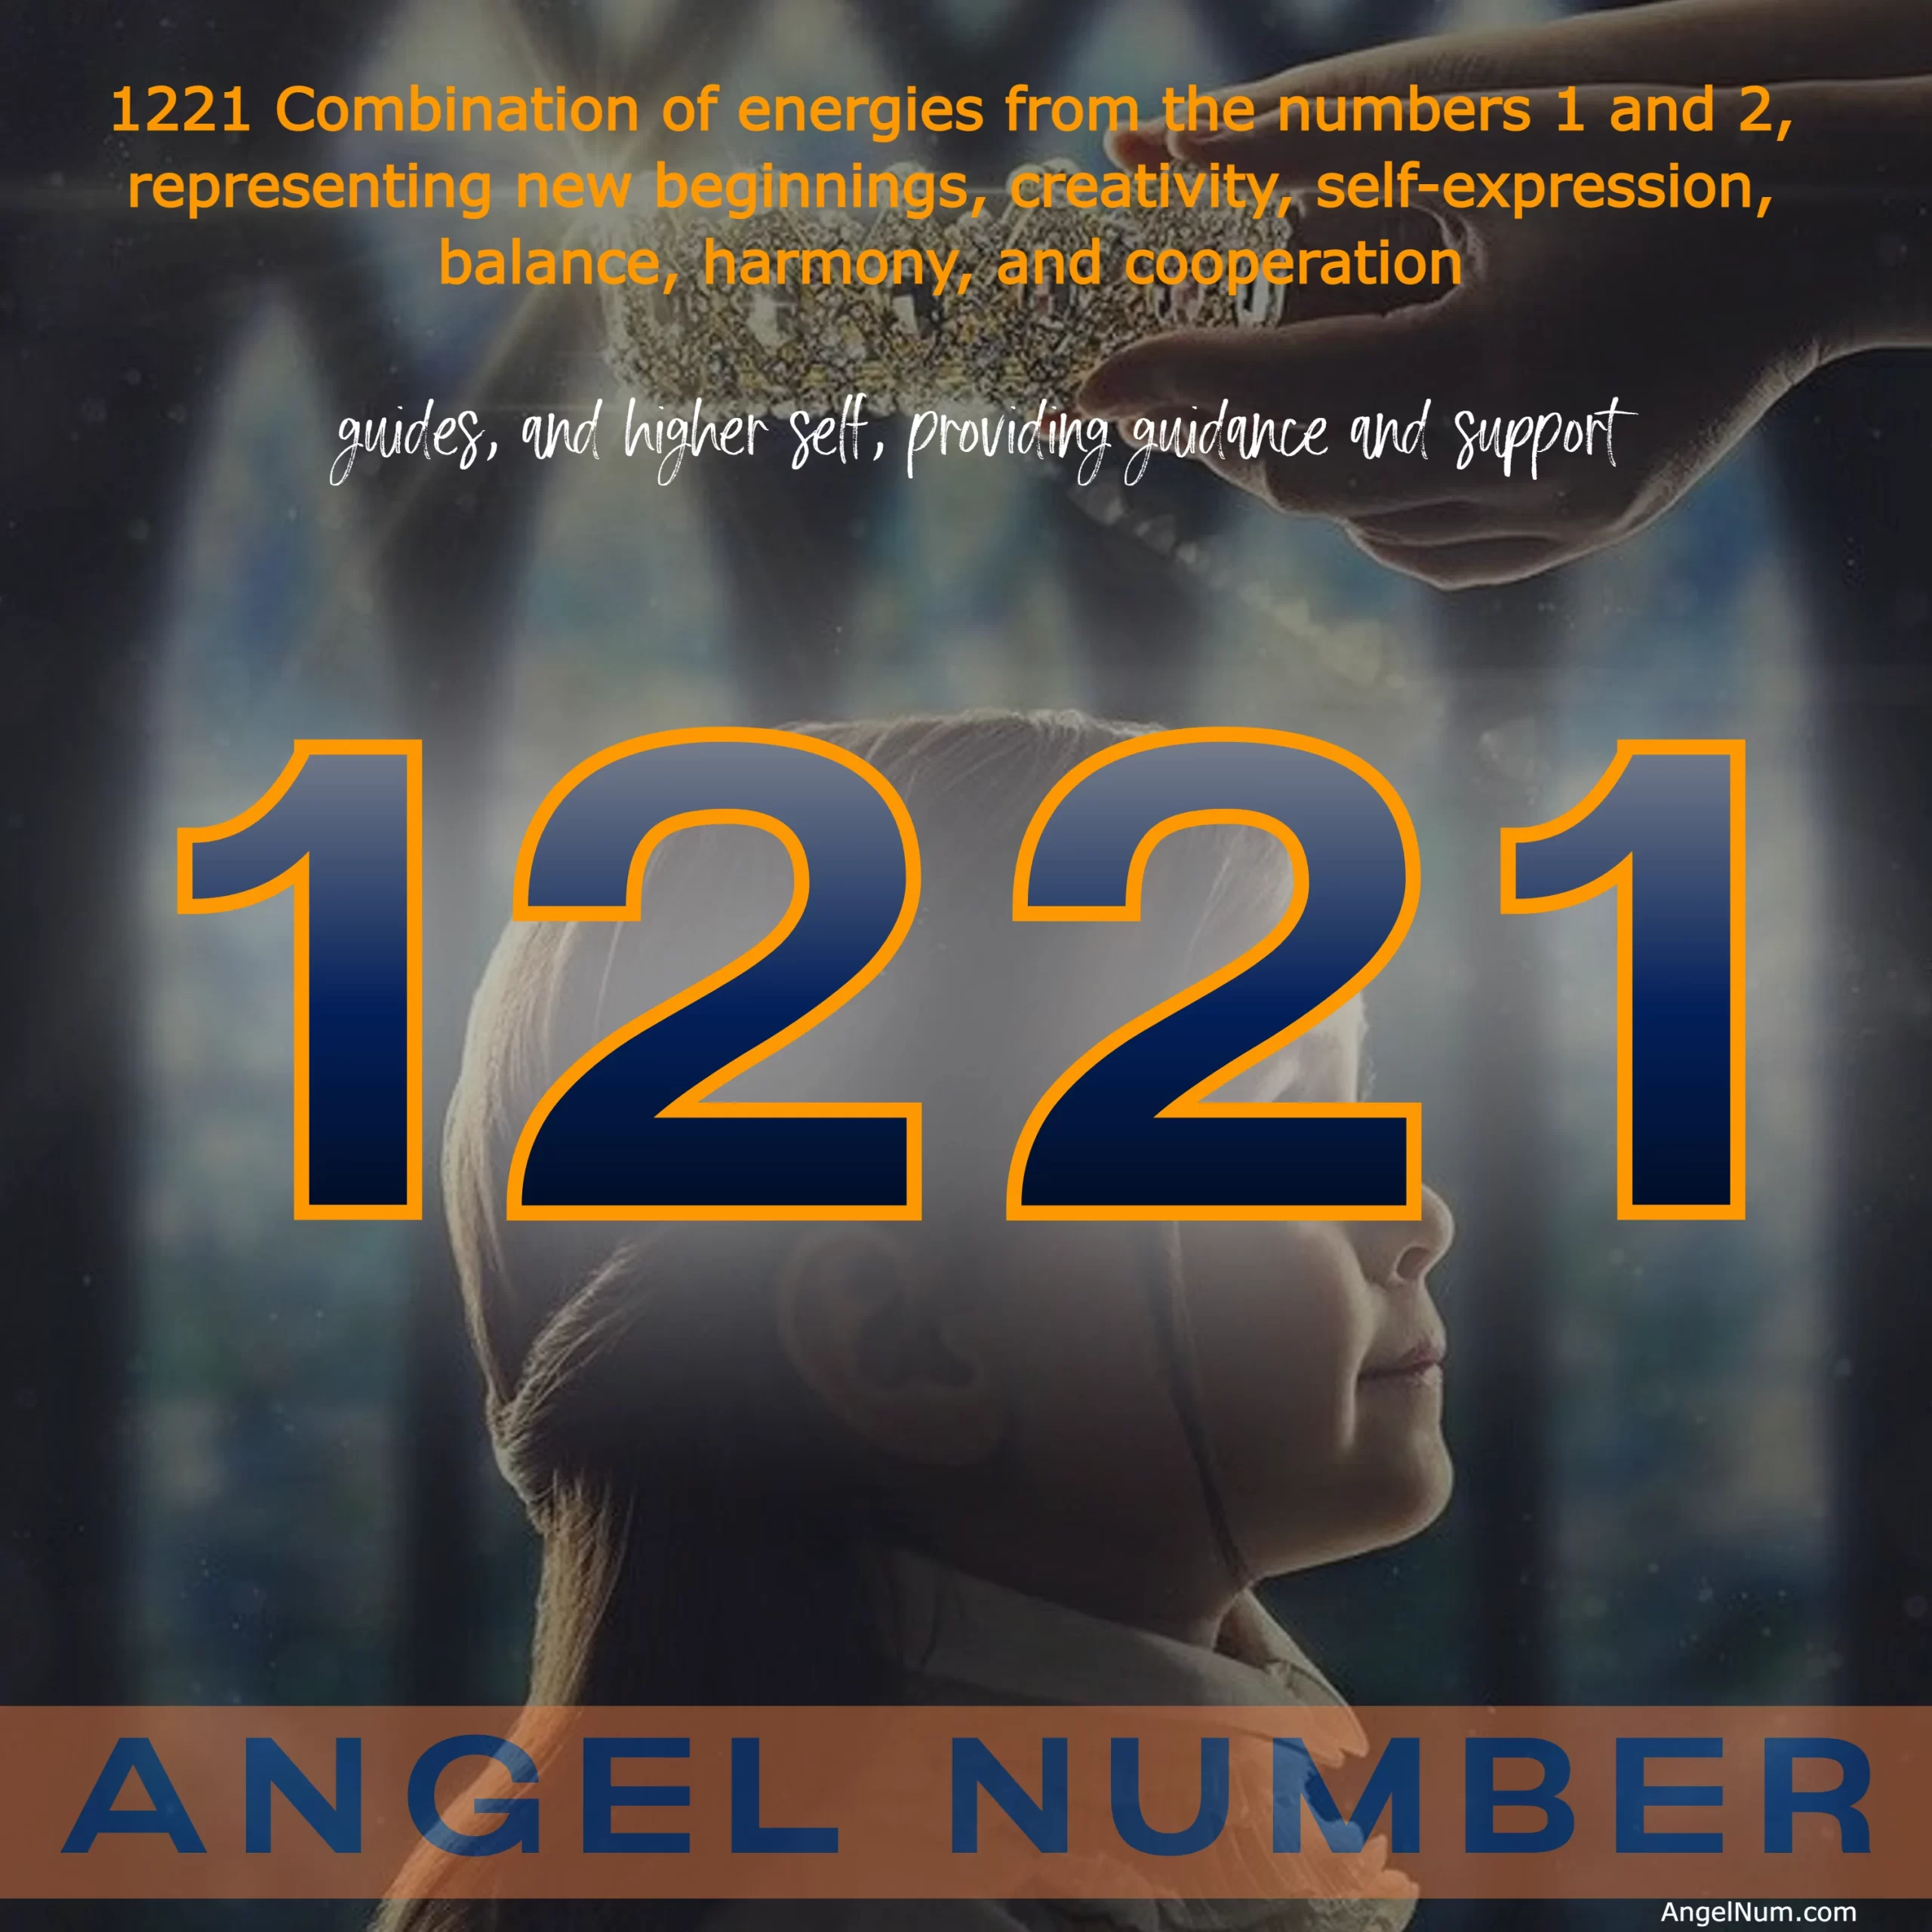 Unlocking the Meaning and Guidance of Angel Number 1221